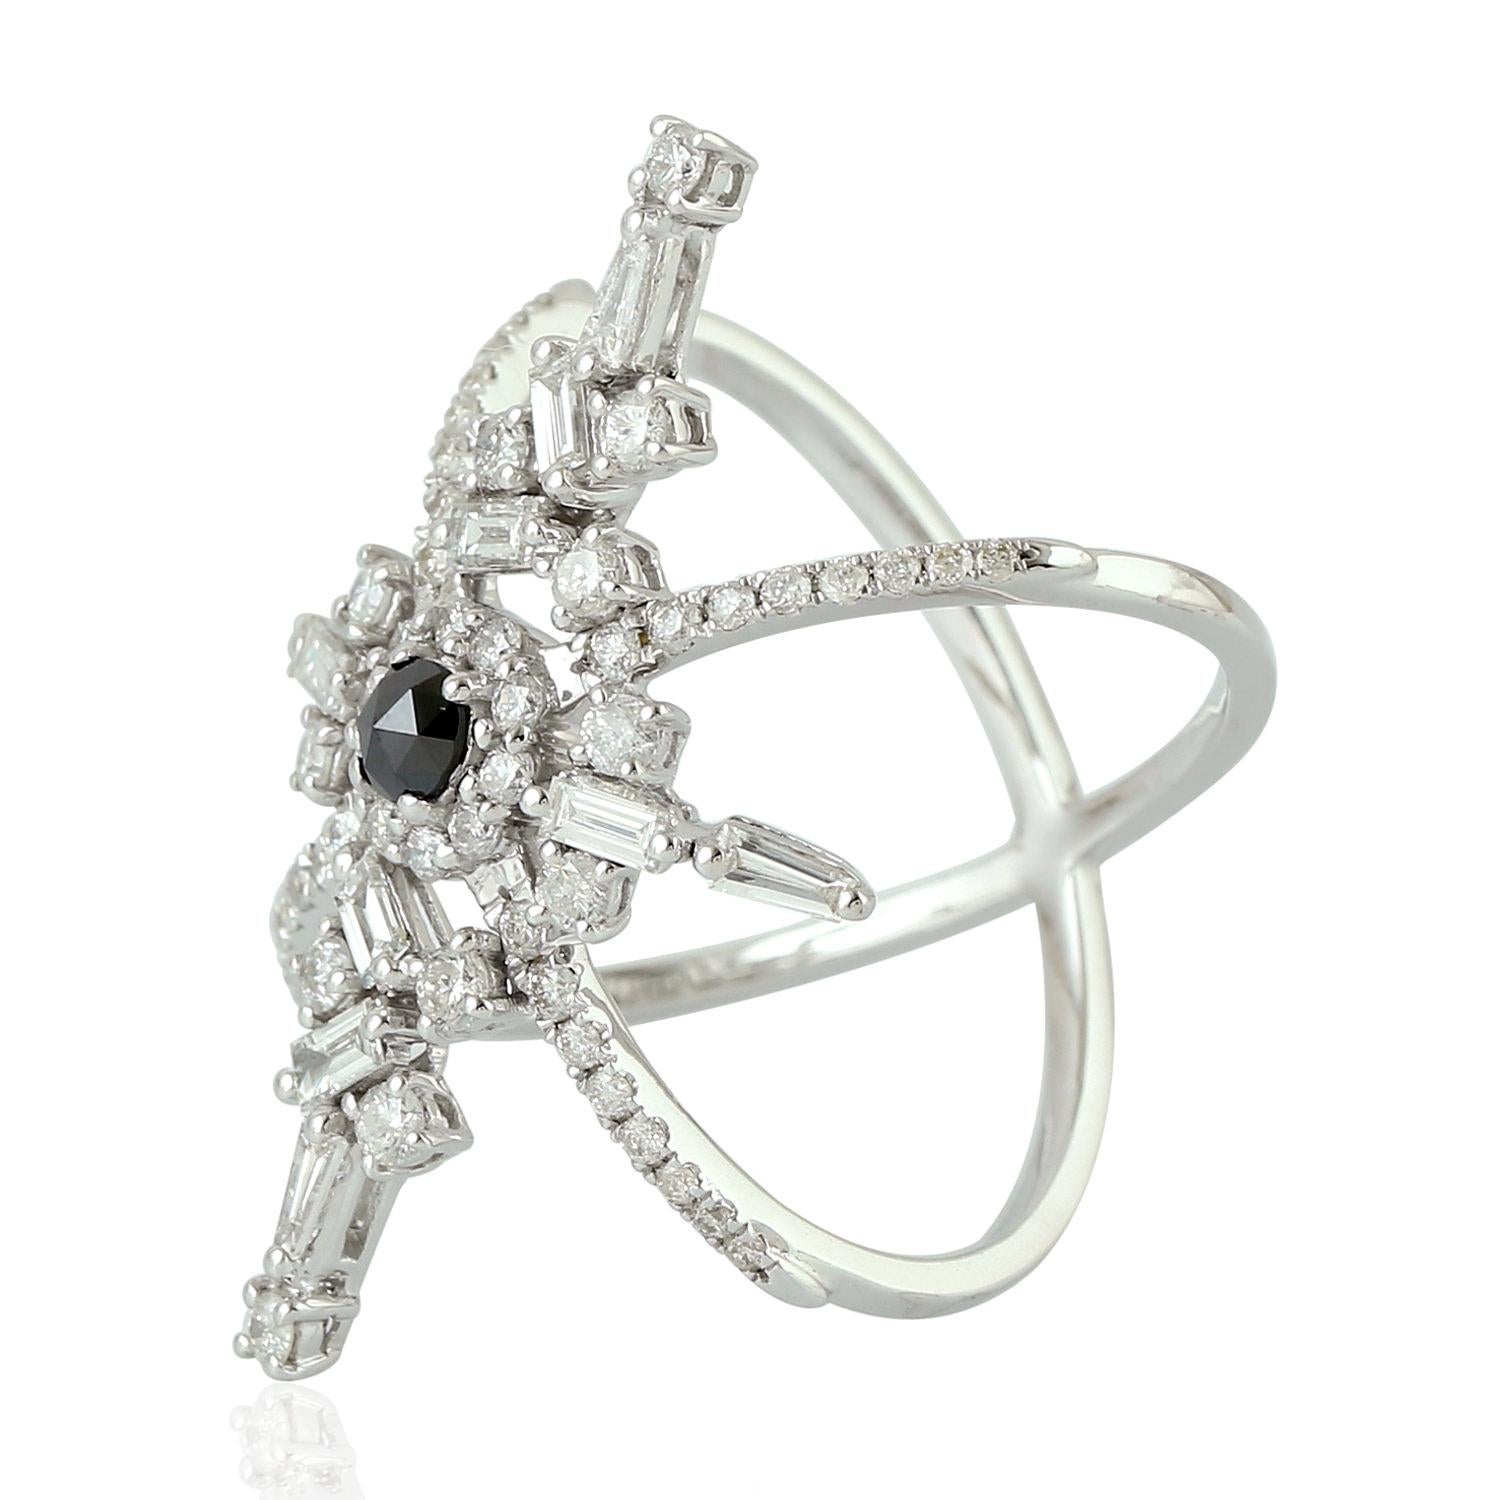 Modern Star Shape Baguette Ring with Black Diamond in Center Enclosed by Pave Diamonds For Sale